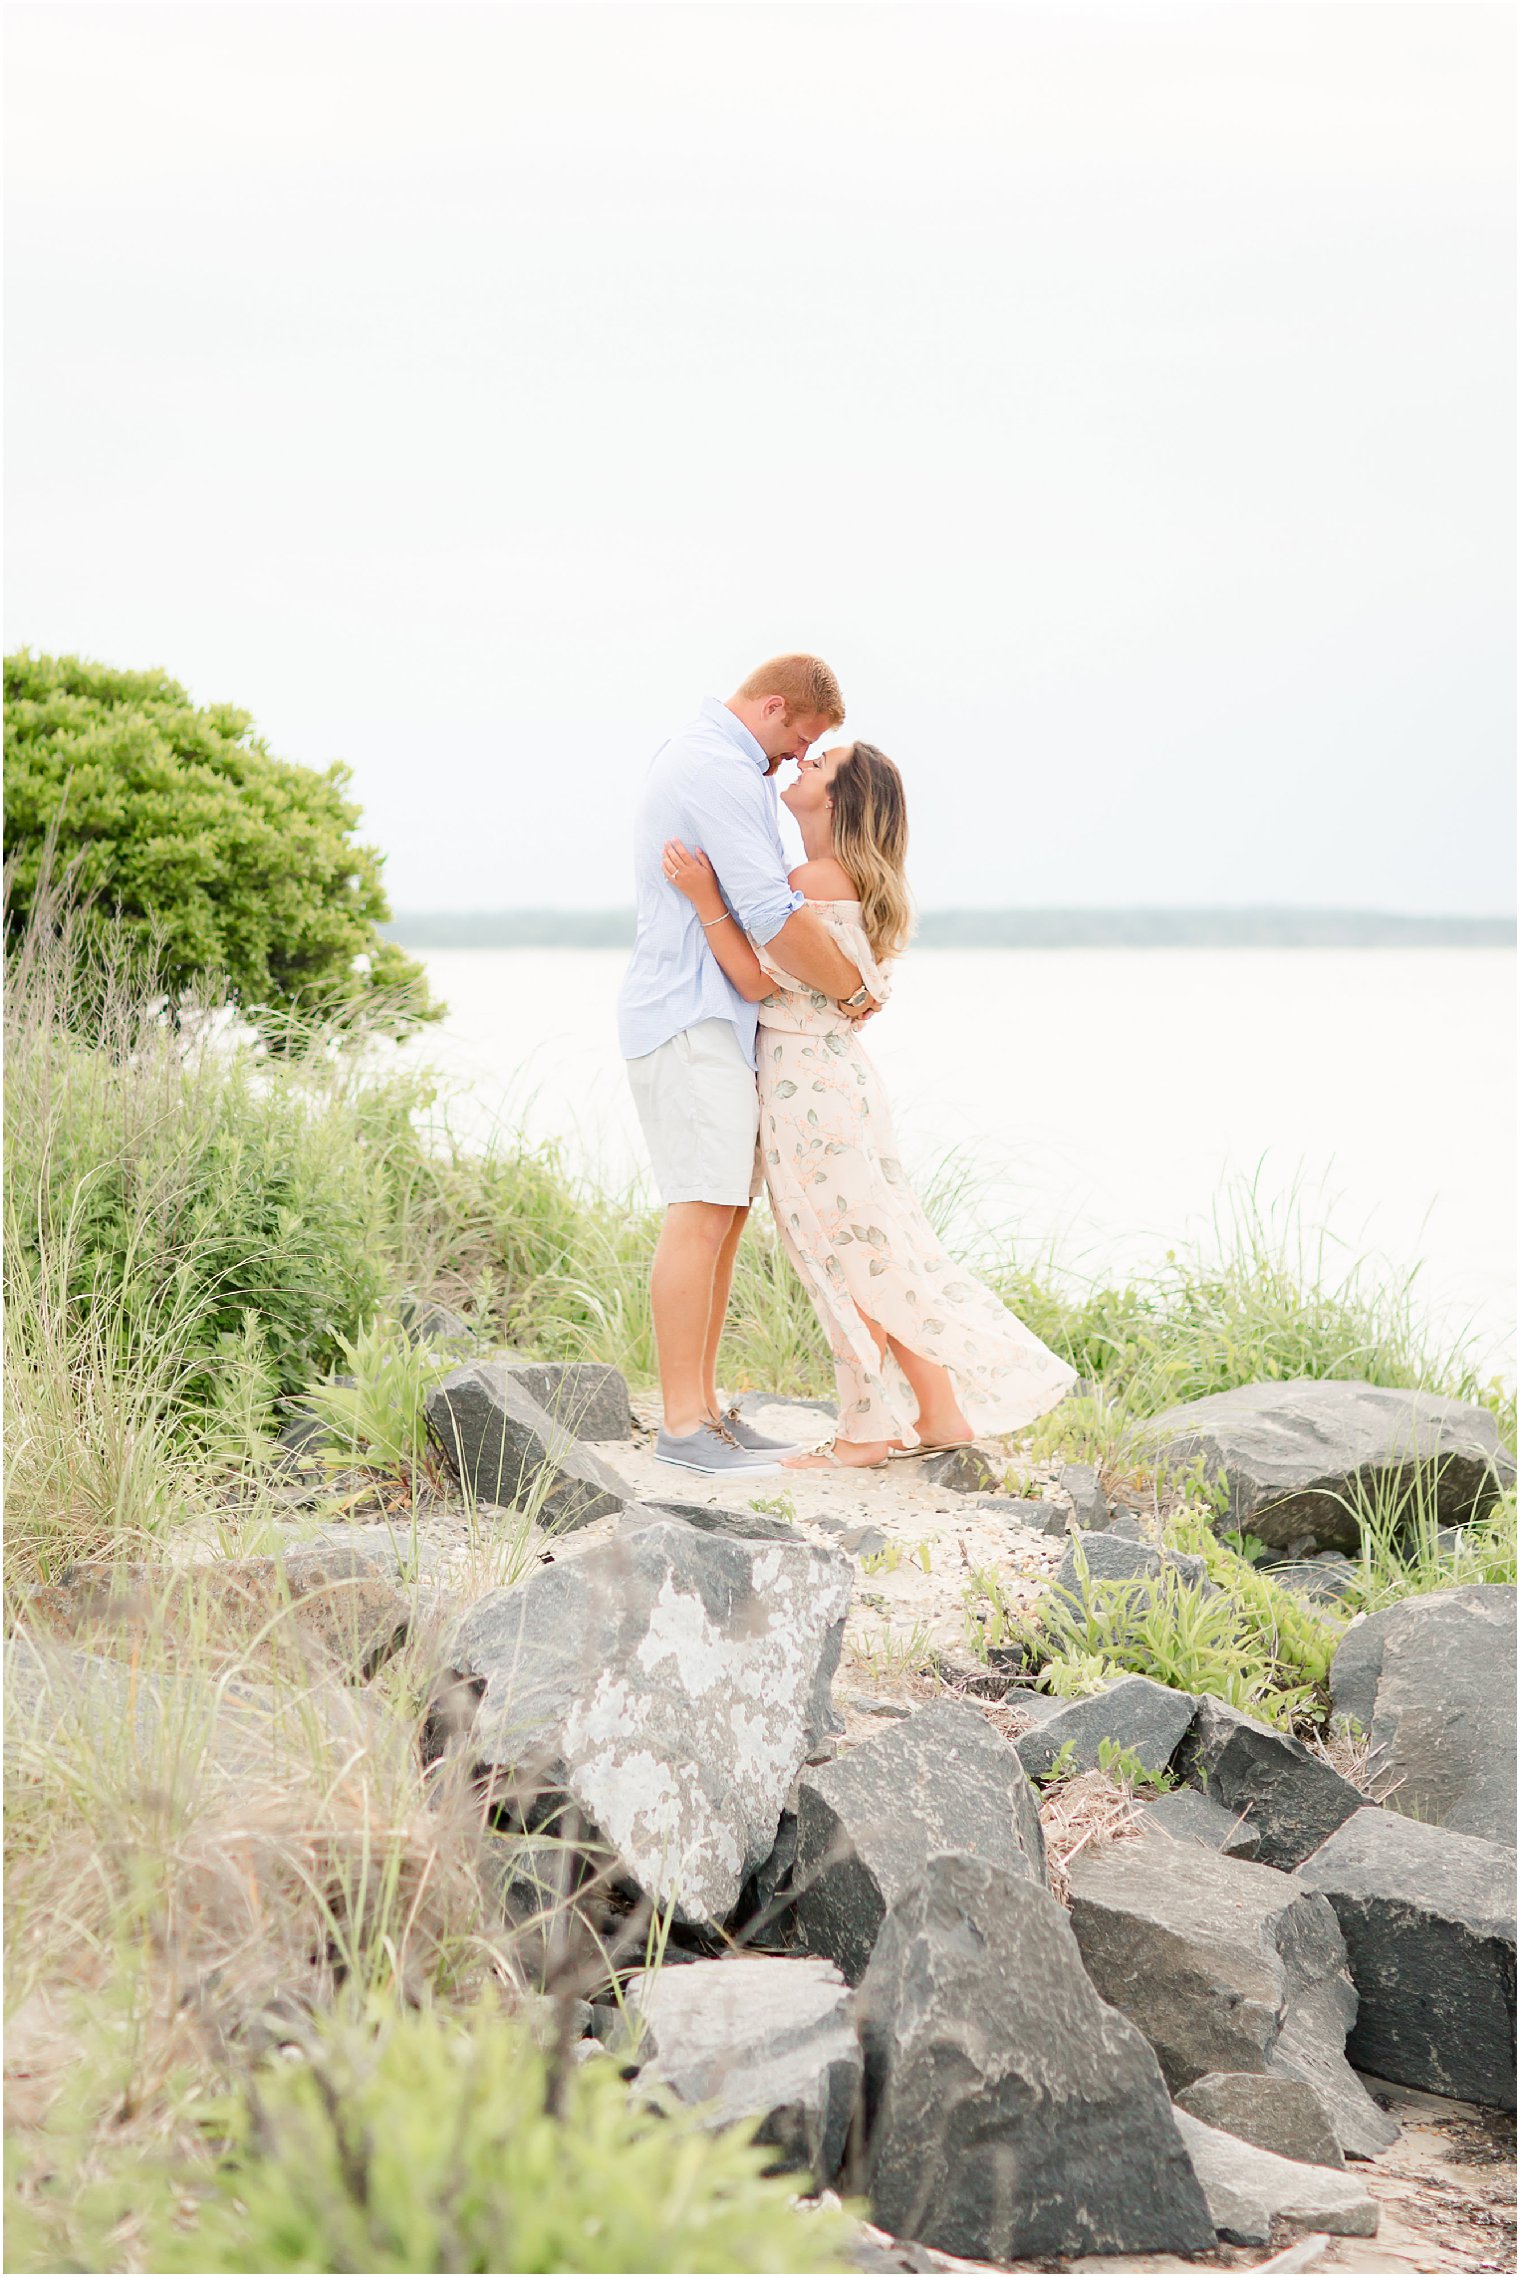 Romantic engagement photos near the water